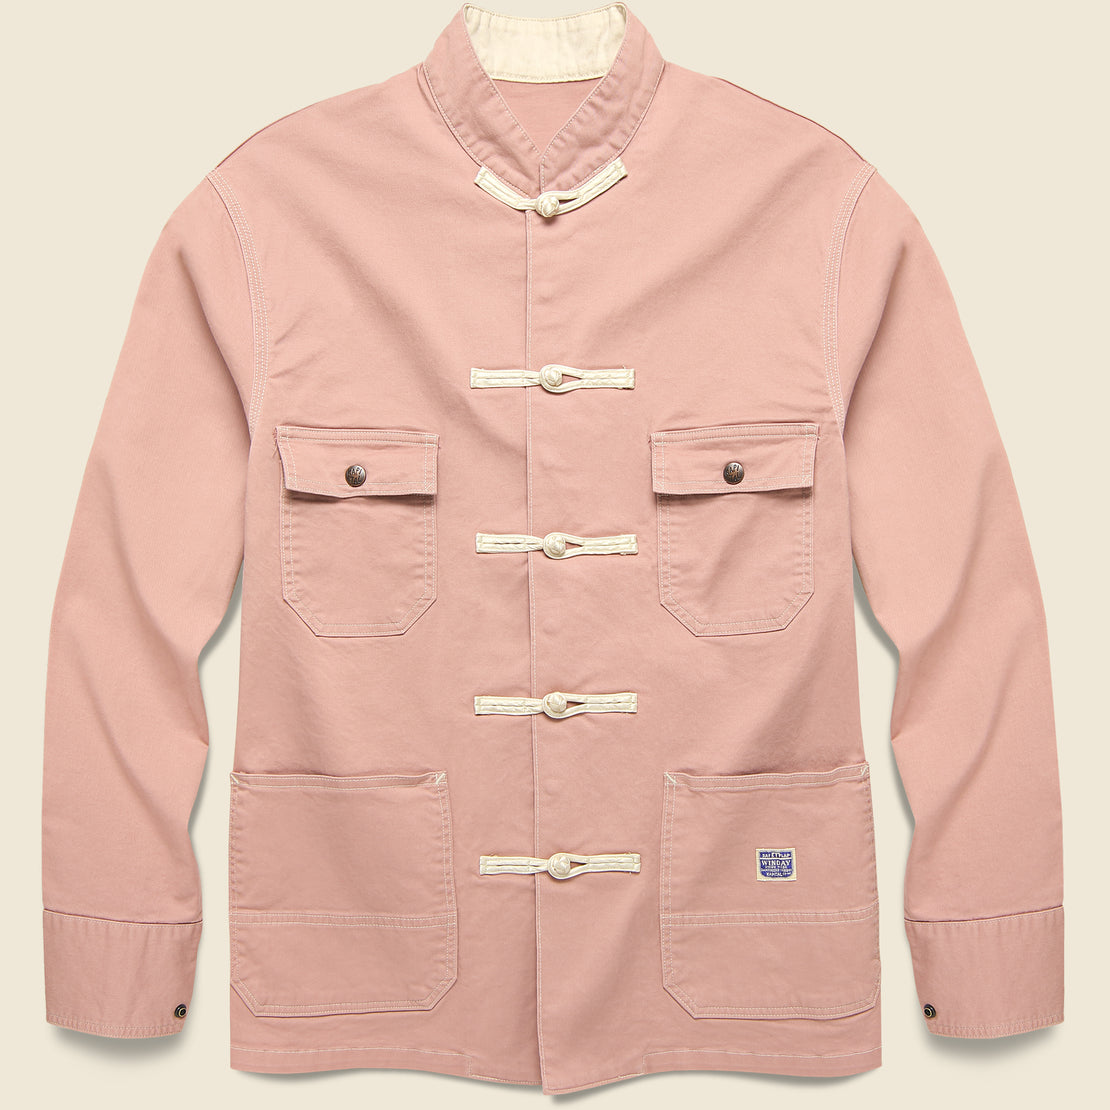 Kapital Stretch Chino Kung Fu Coverall Jacket - Pink/Beige